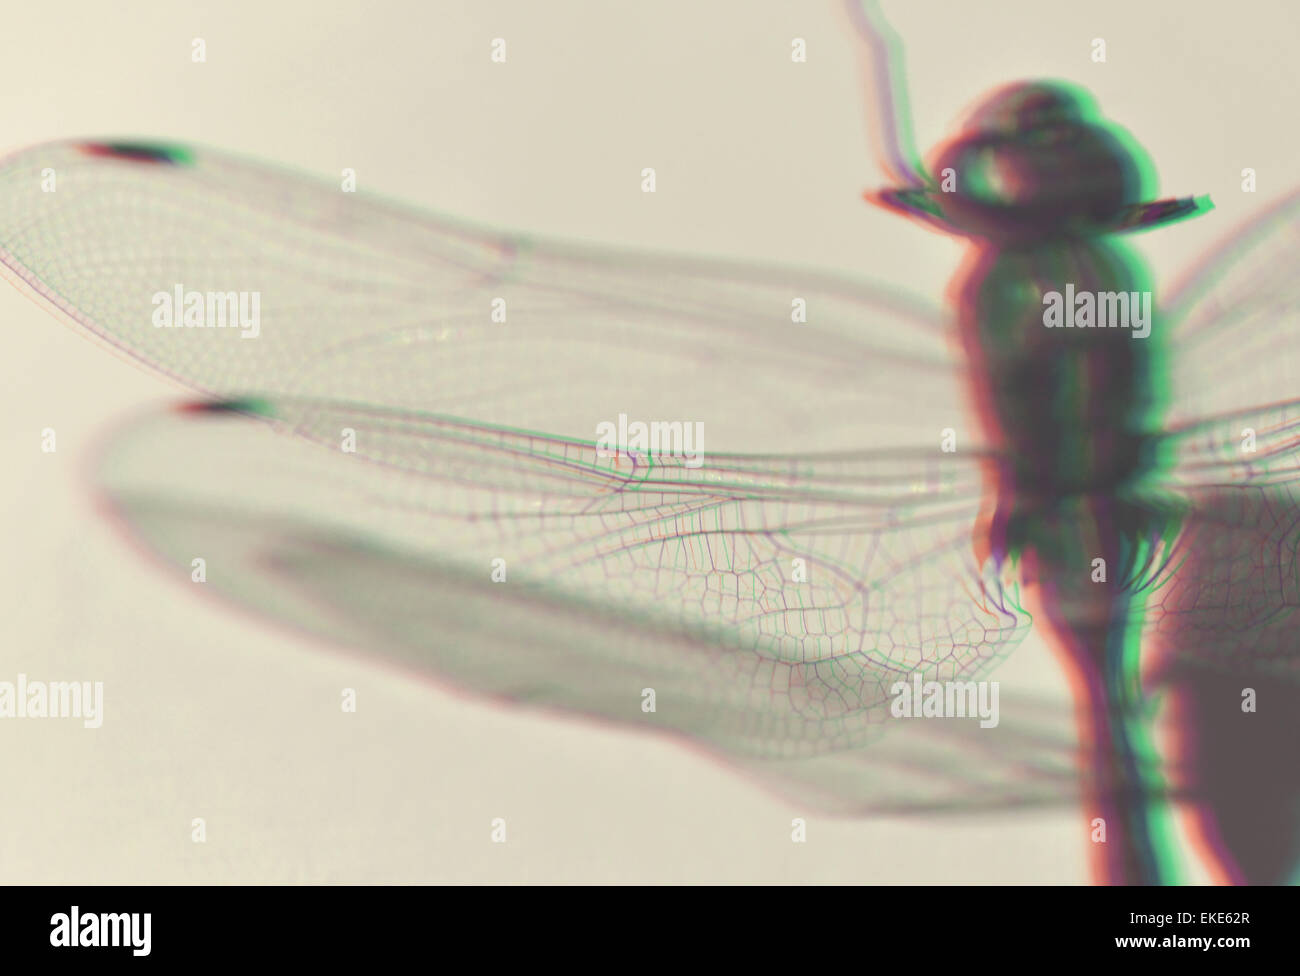 Dragonfly wings close up with 3D anaglyph effect Stock Photo